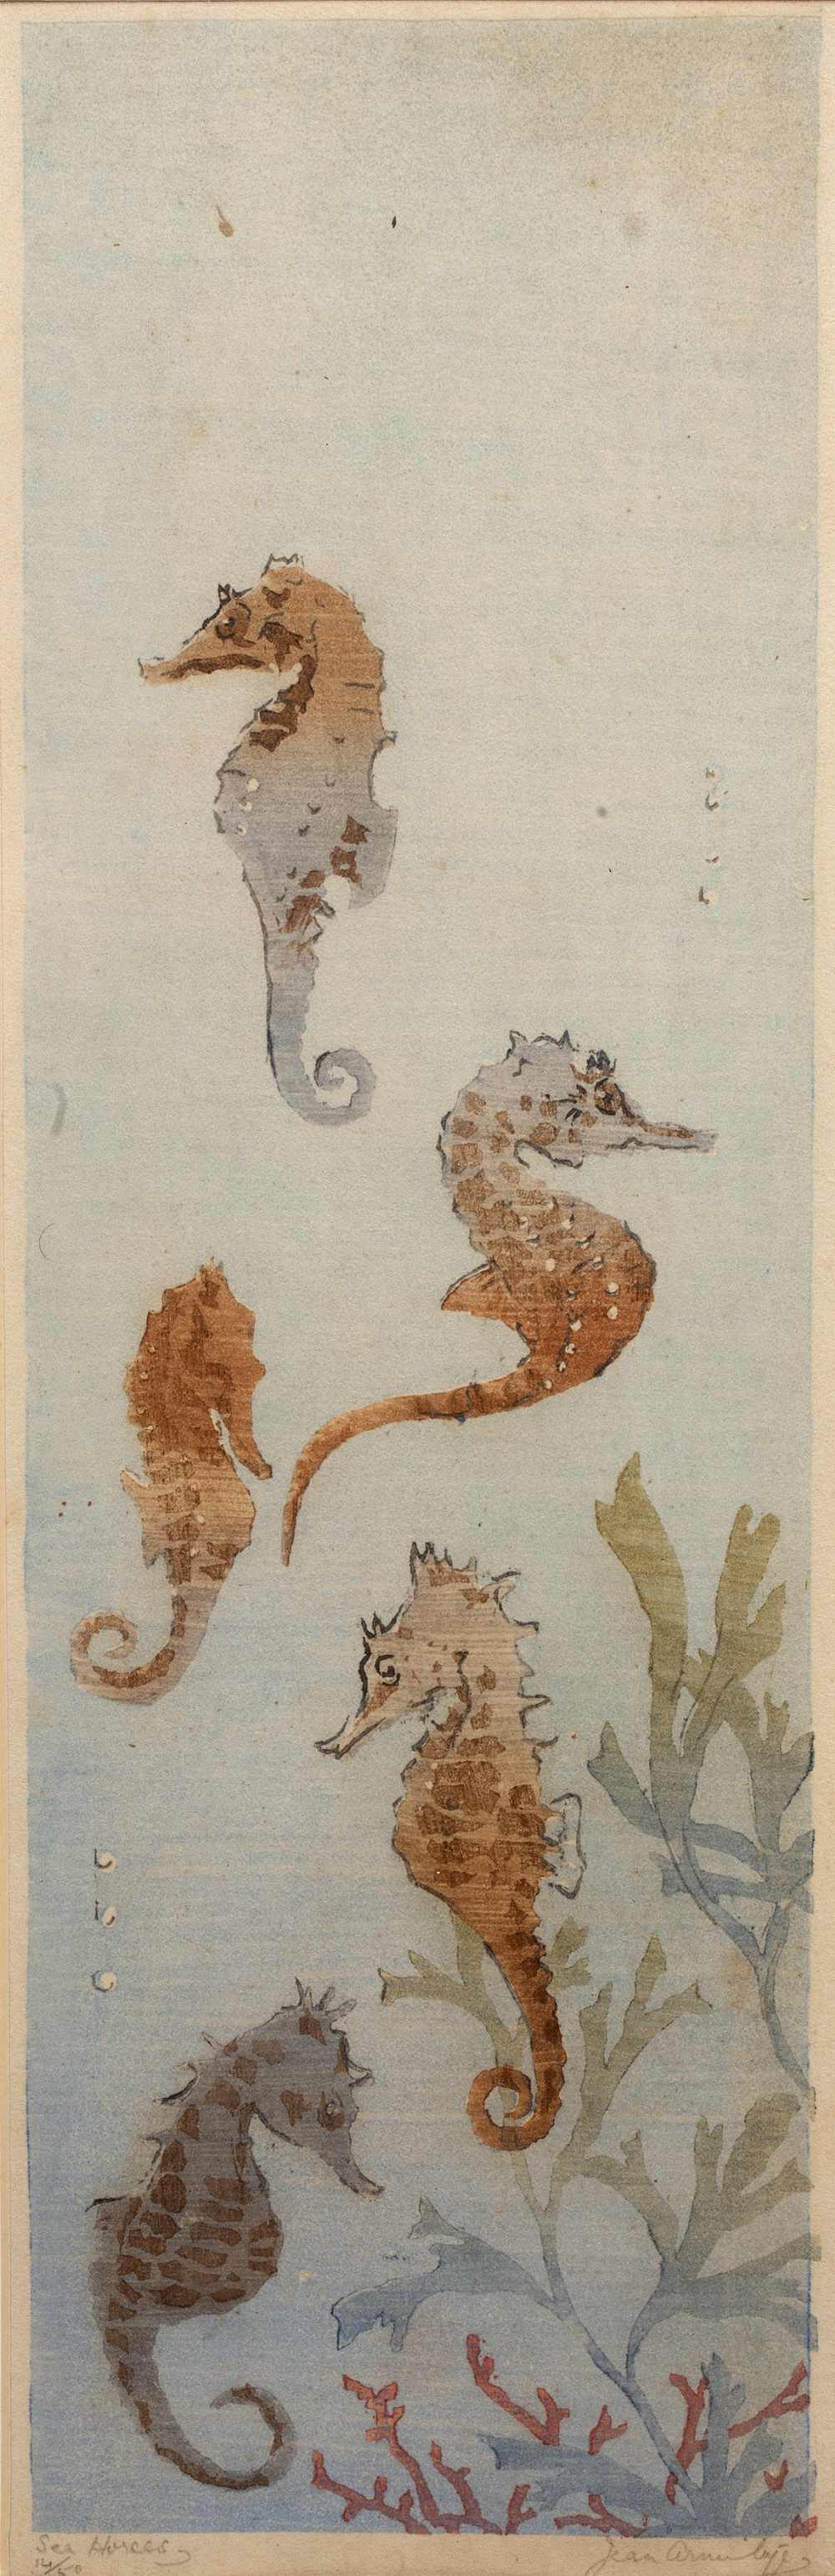 Jean Armitage (1895-1988) Sea Horses 1450, signed, titled, and numbered in pencil (in the margin)